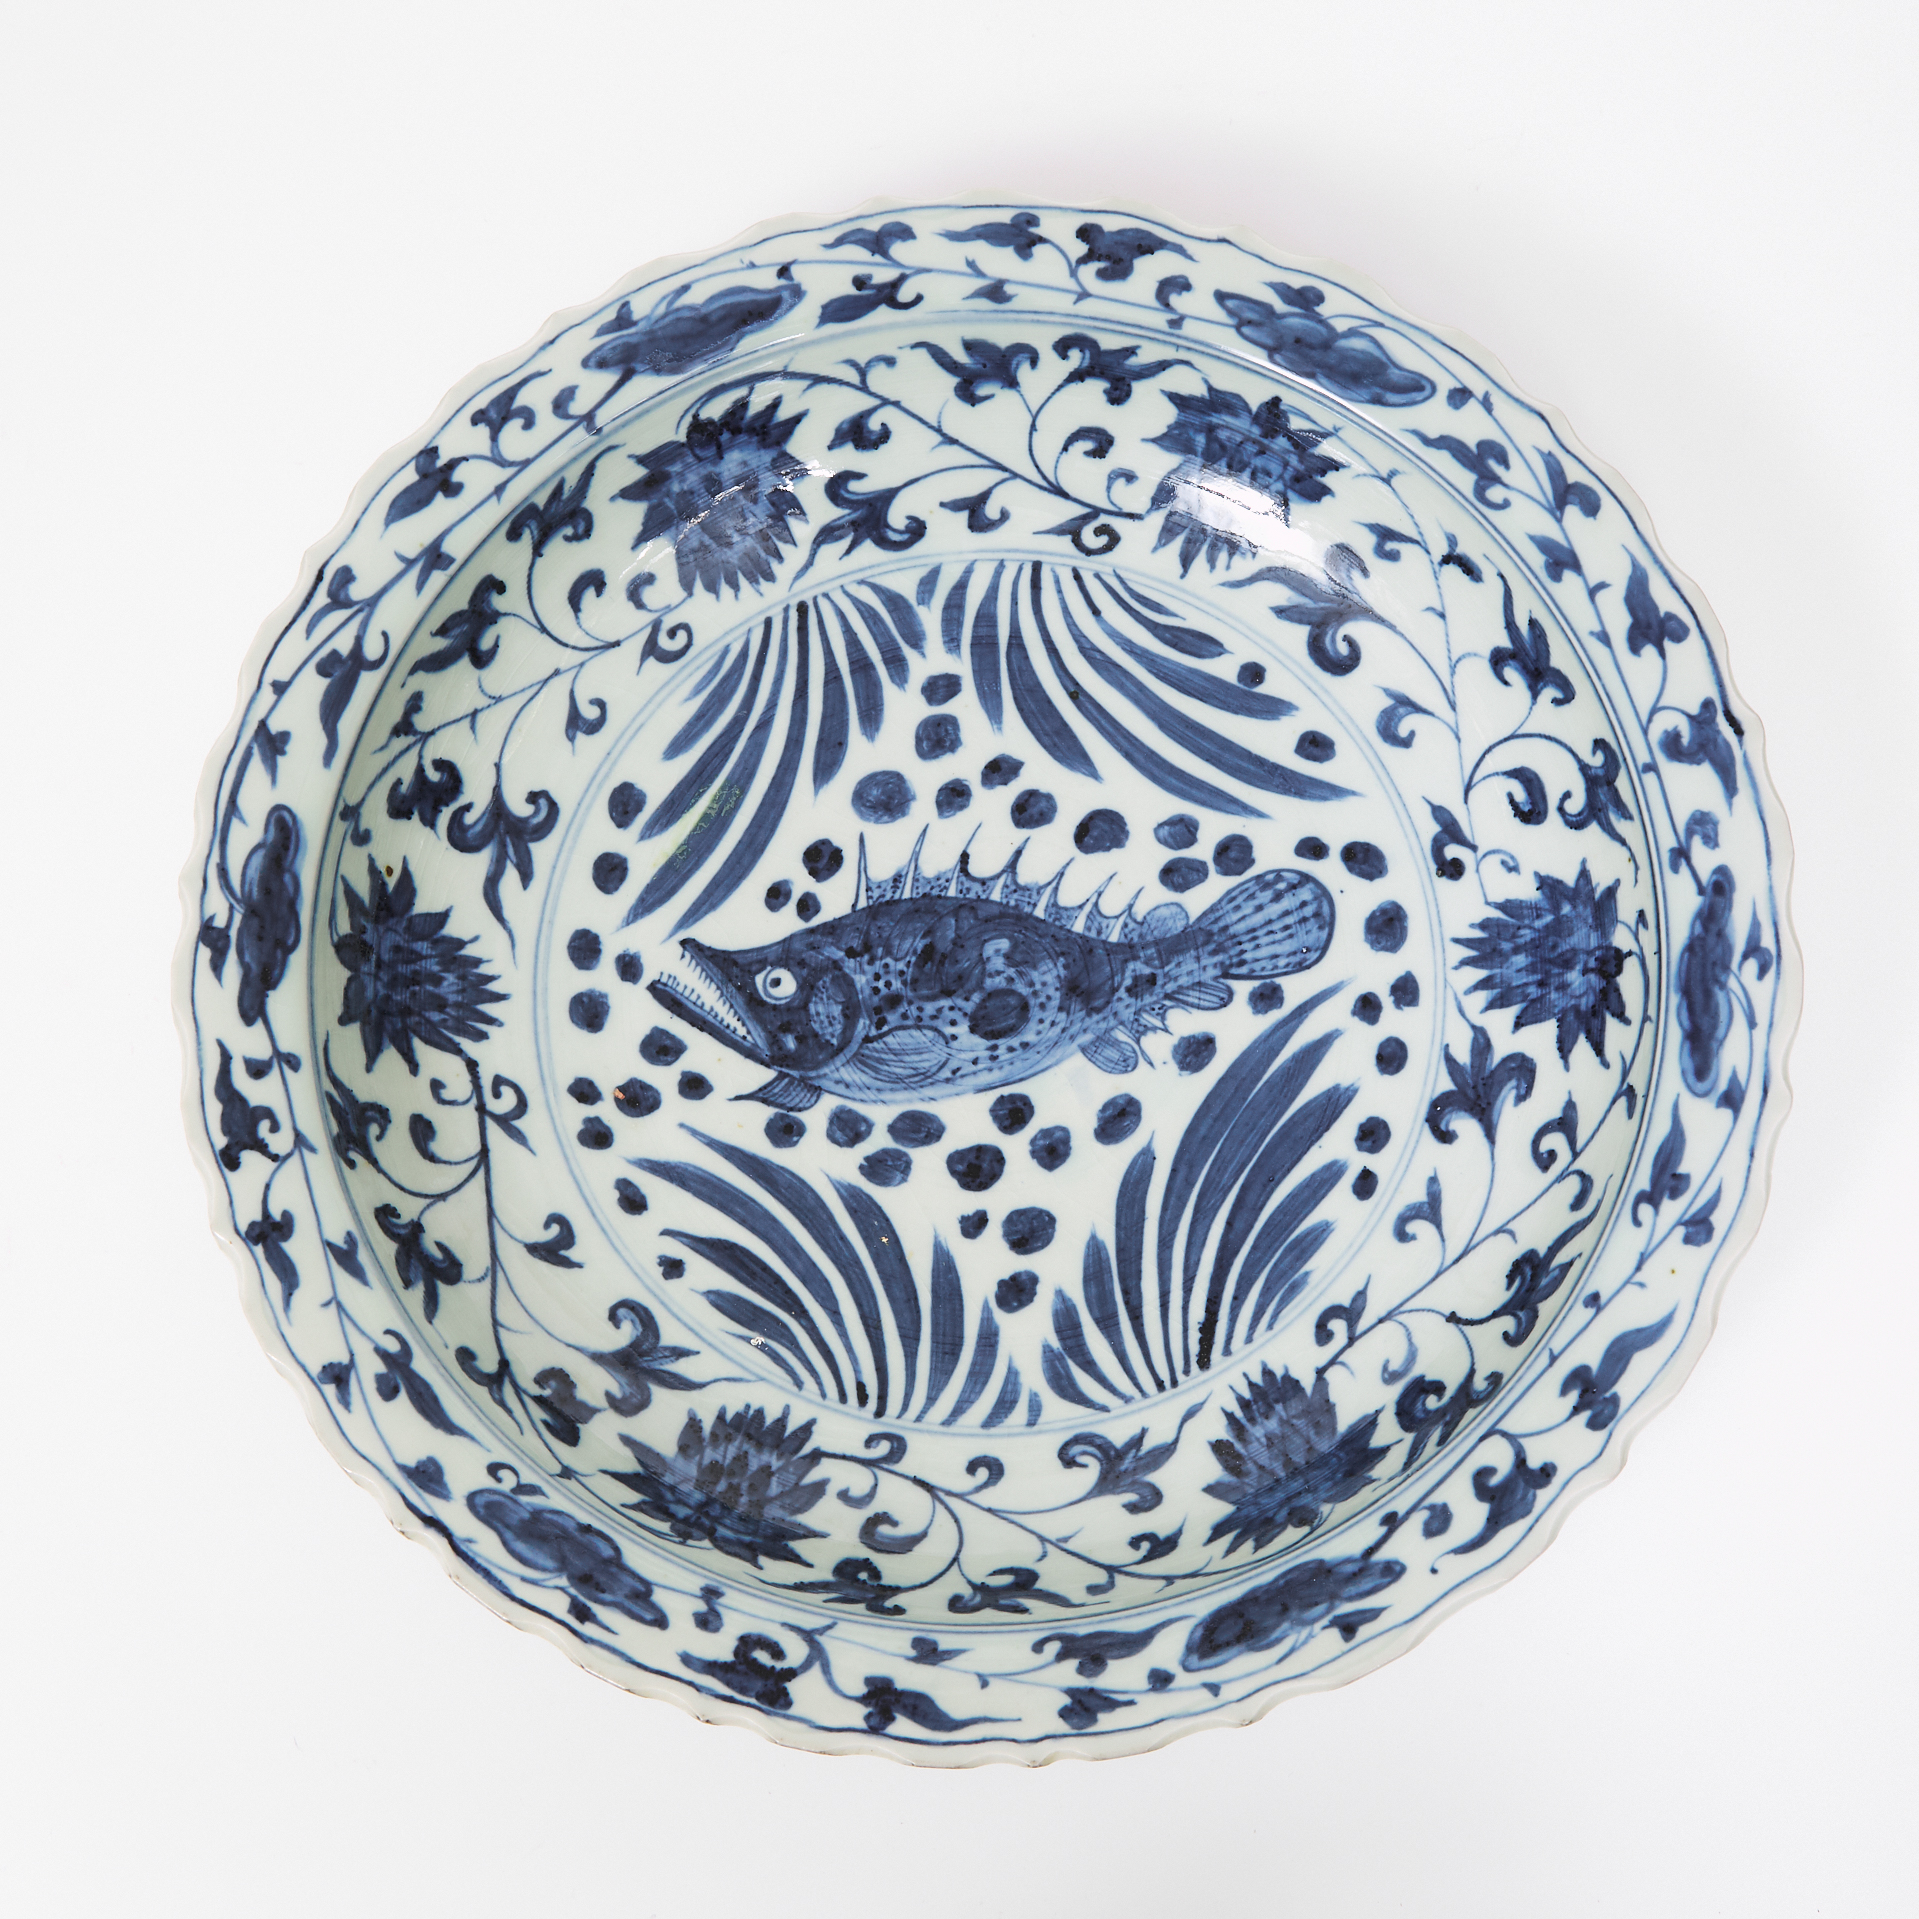 A Massive Blue and White 'Fish' Charger, Xuande Mark, 19th/20th Century